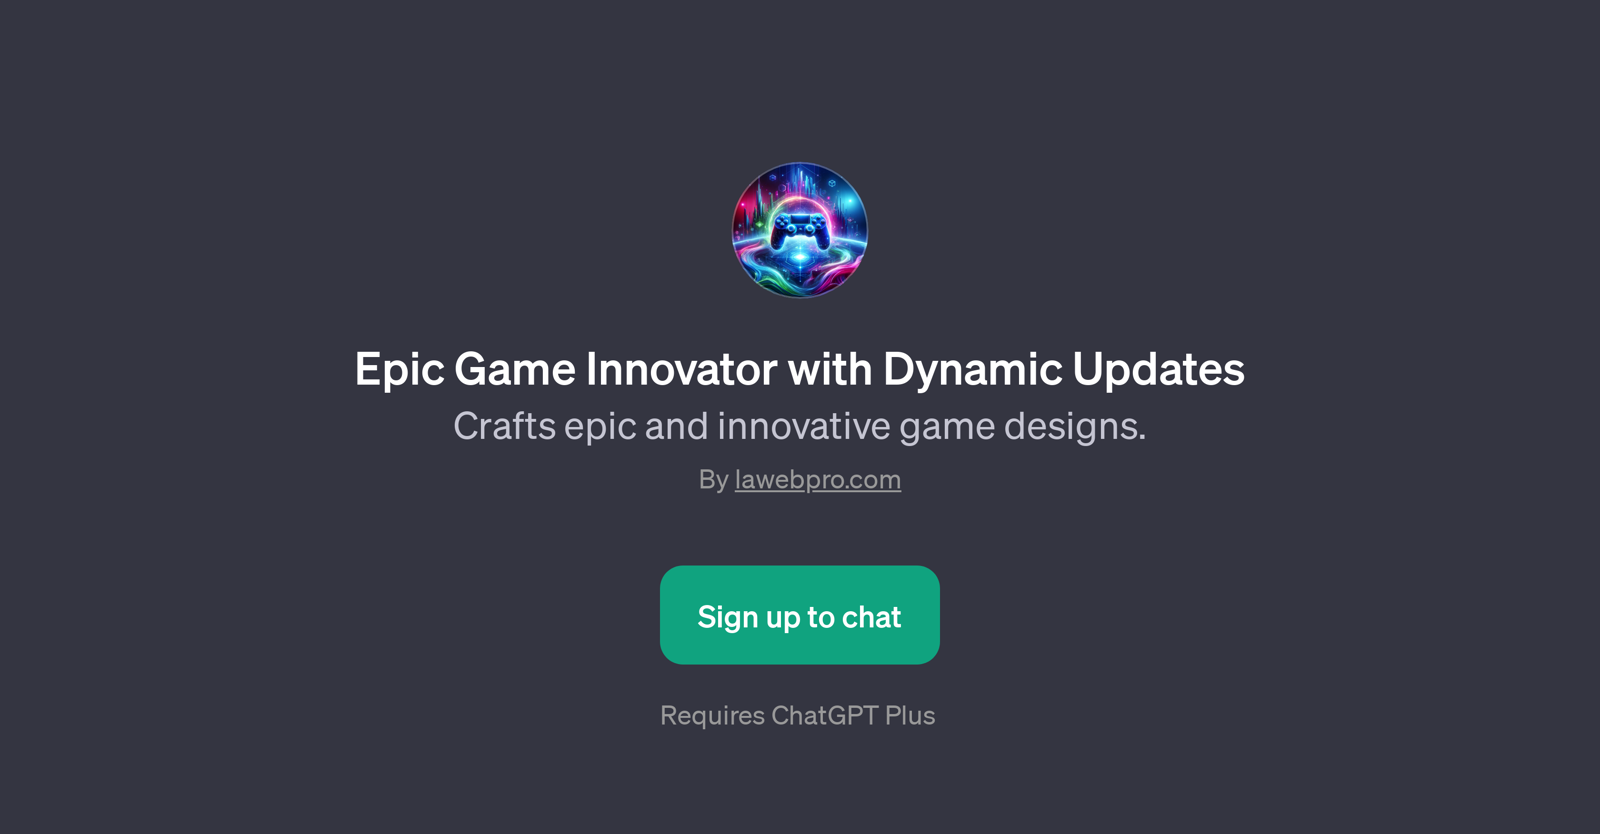 Epic Game Innovator with Dynamic Updates website